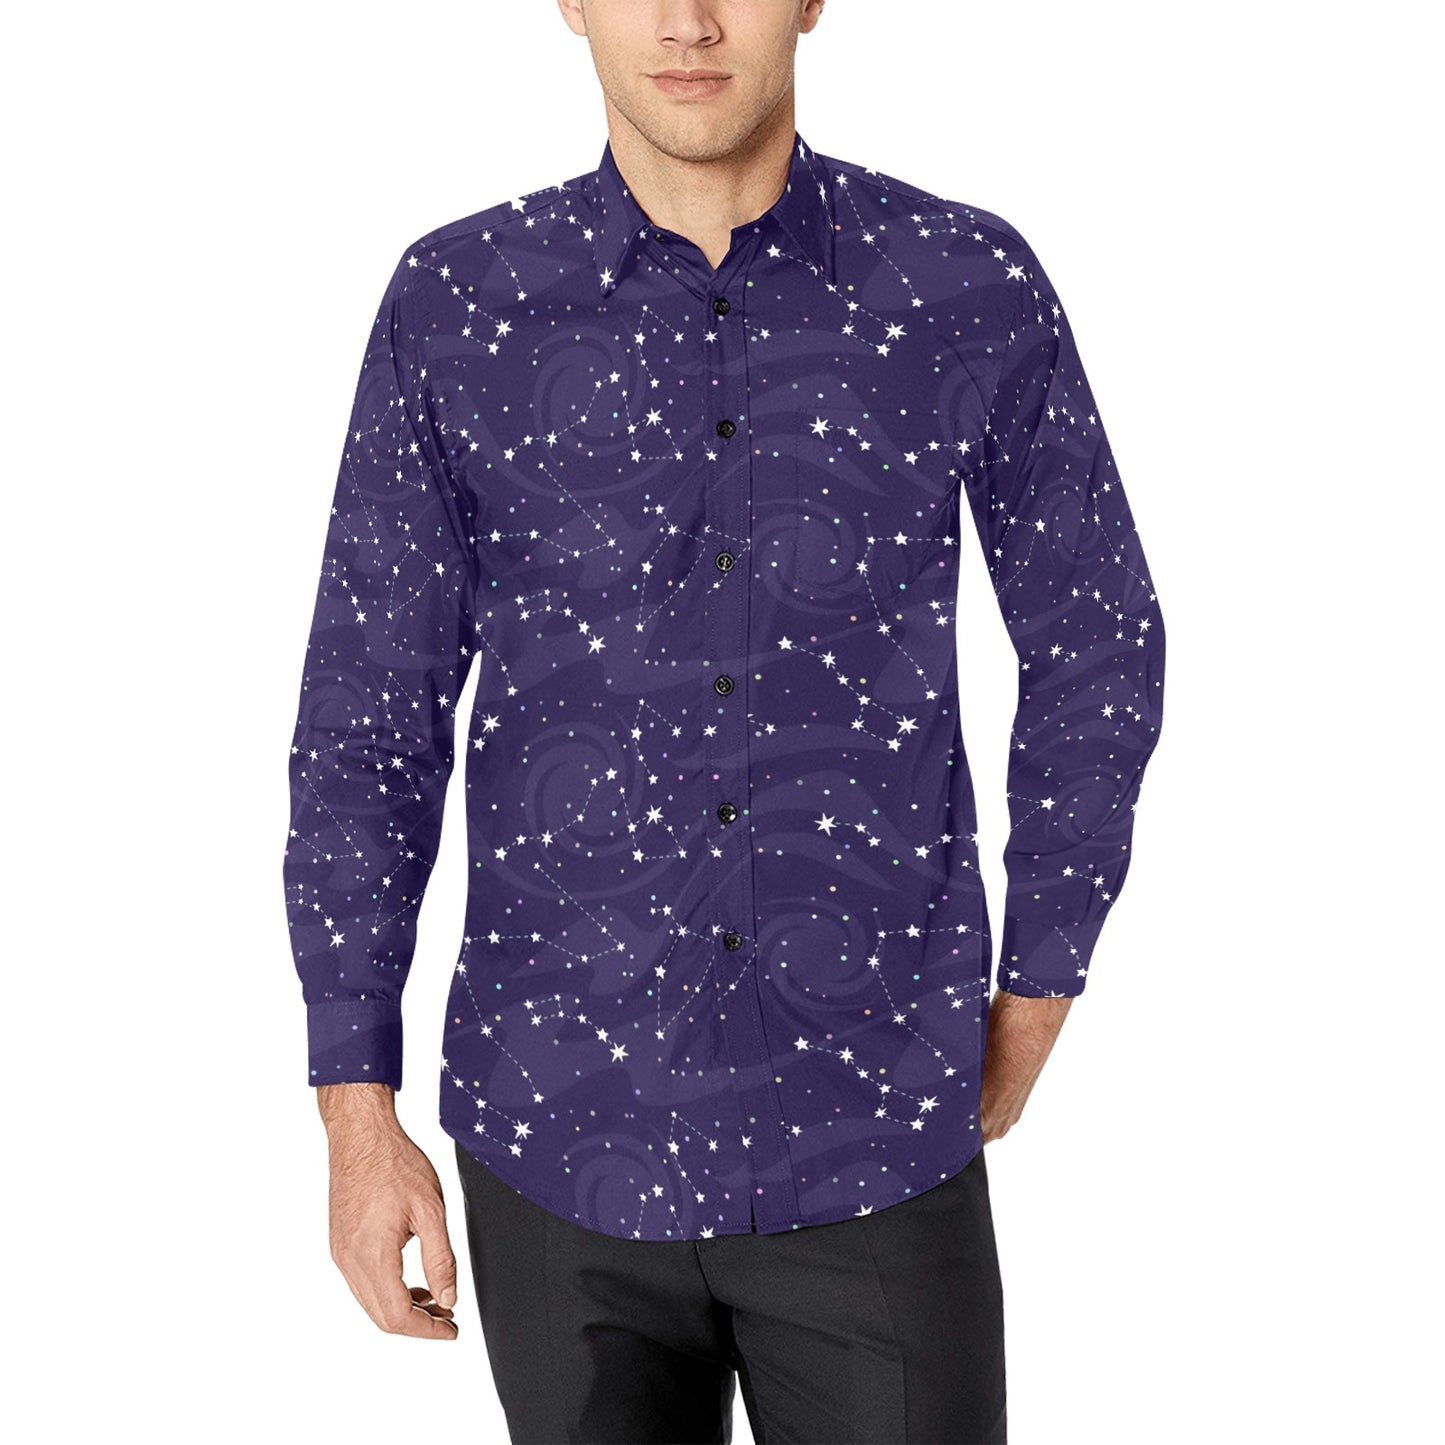 Space Long Sleeve Men Button Up Shirt, Constellation Universe Stars Print Dress Buttoned Collared Casual Dress Shirt with Chest Pocket